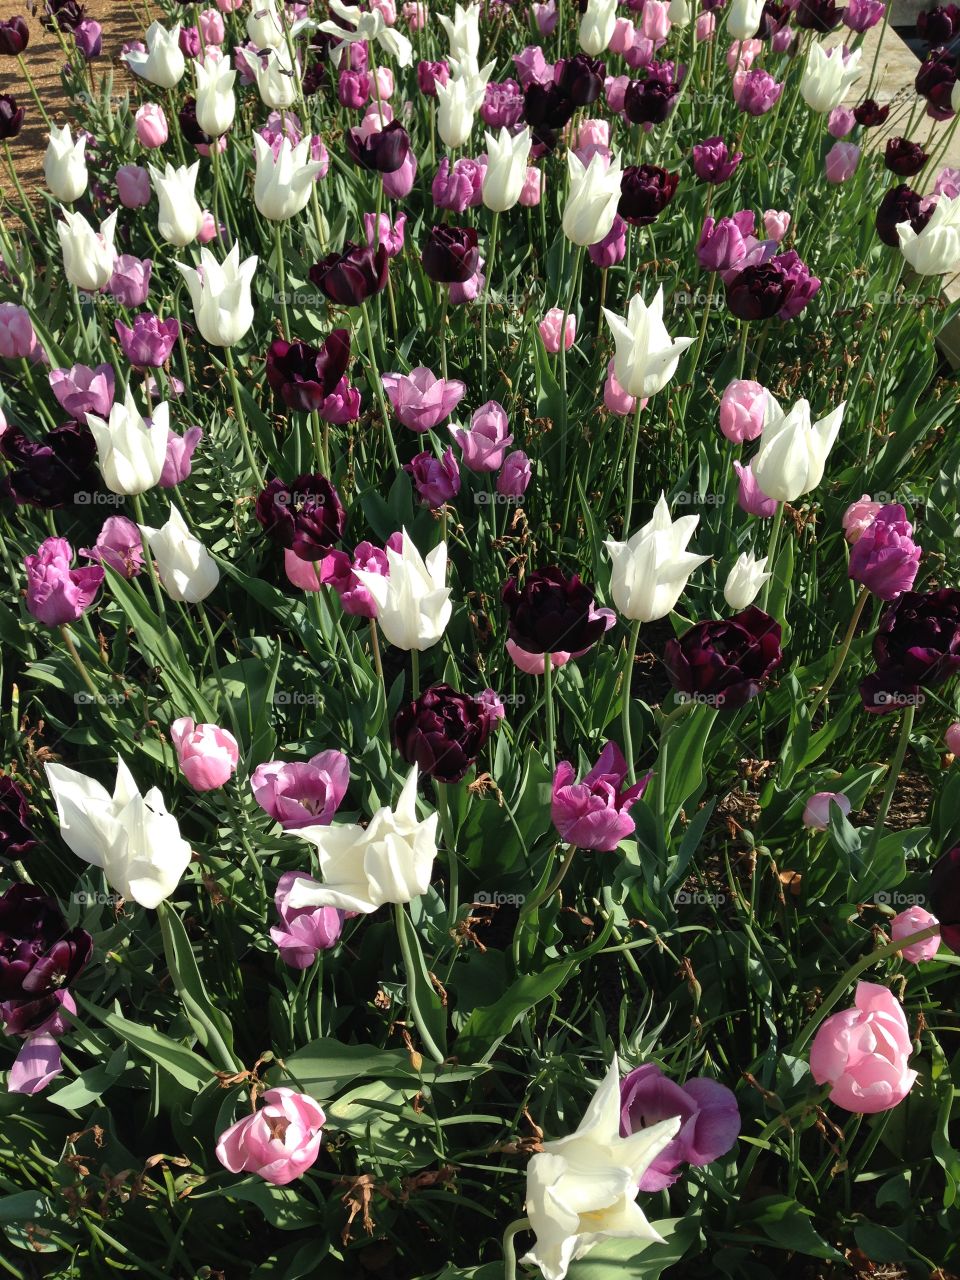 Shades of Purple. White, purple, and pink tulips